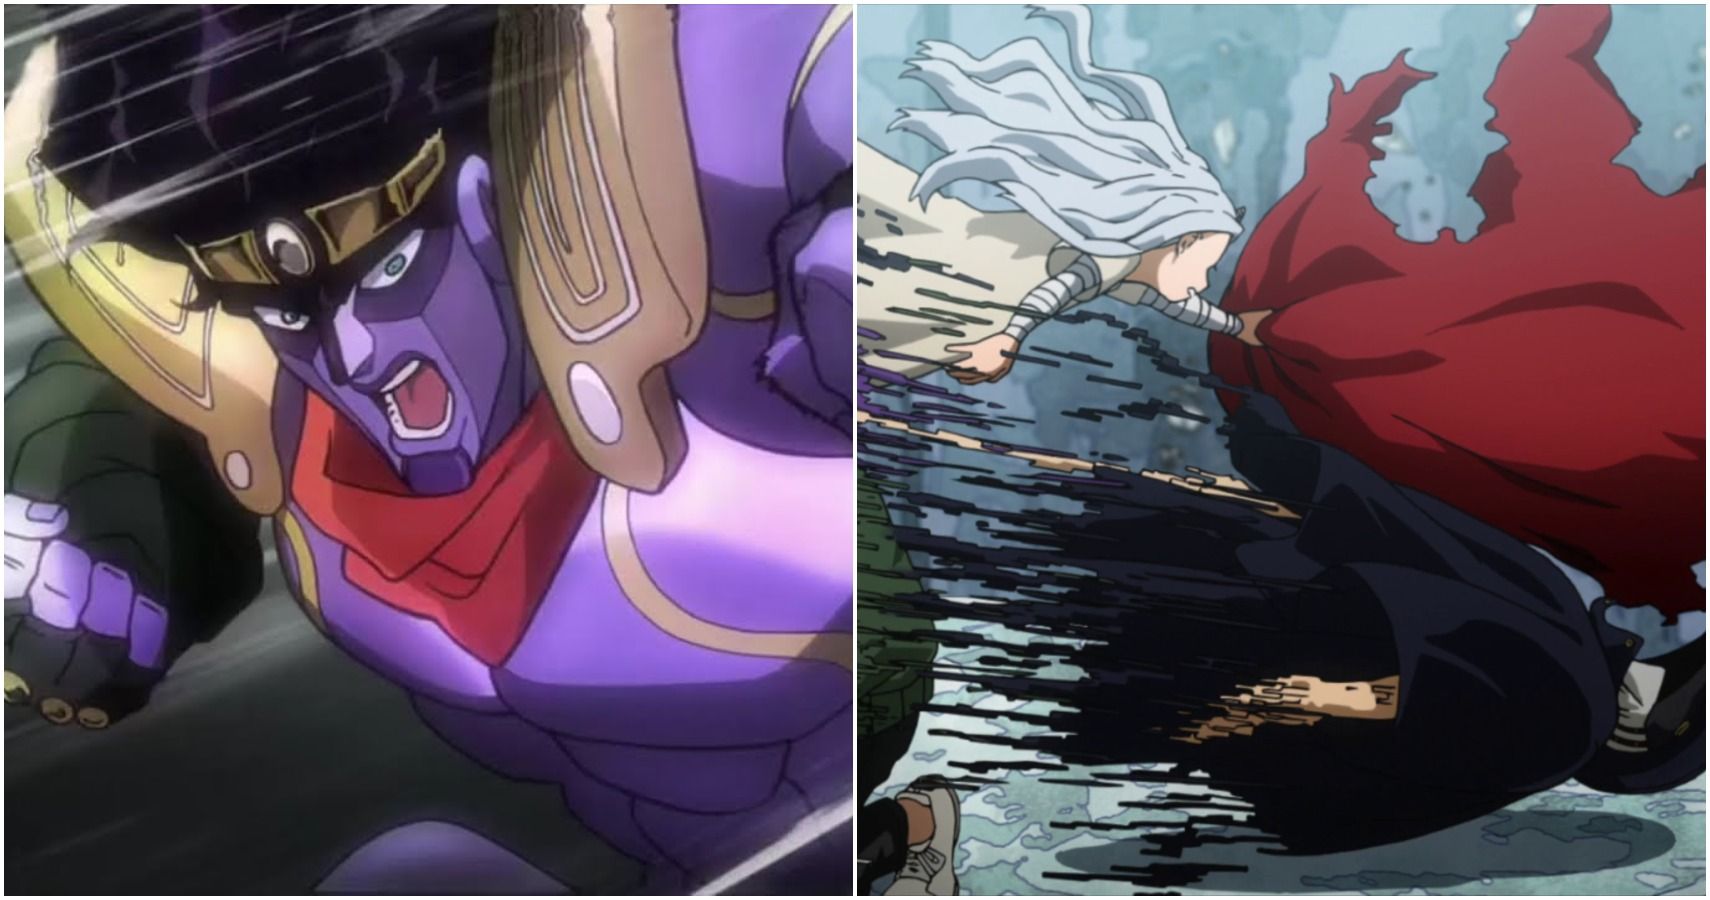 Which are more practical and versatile, stands (JoJo) or quirks (MHA)? -  Quora